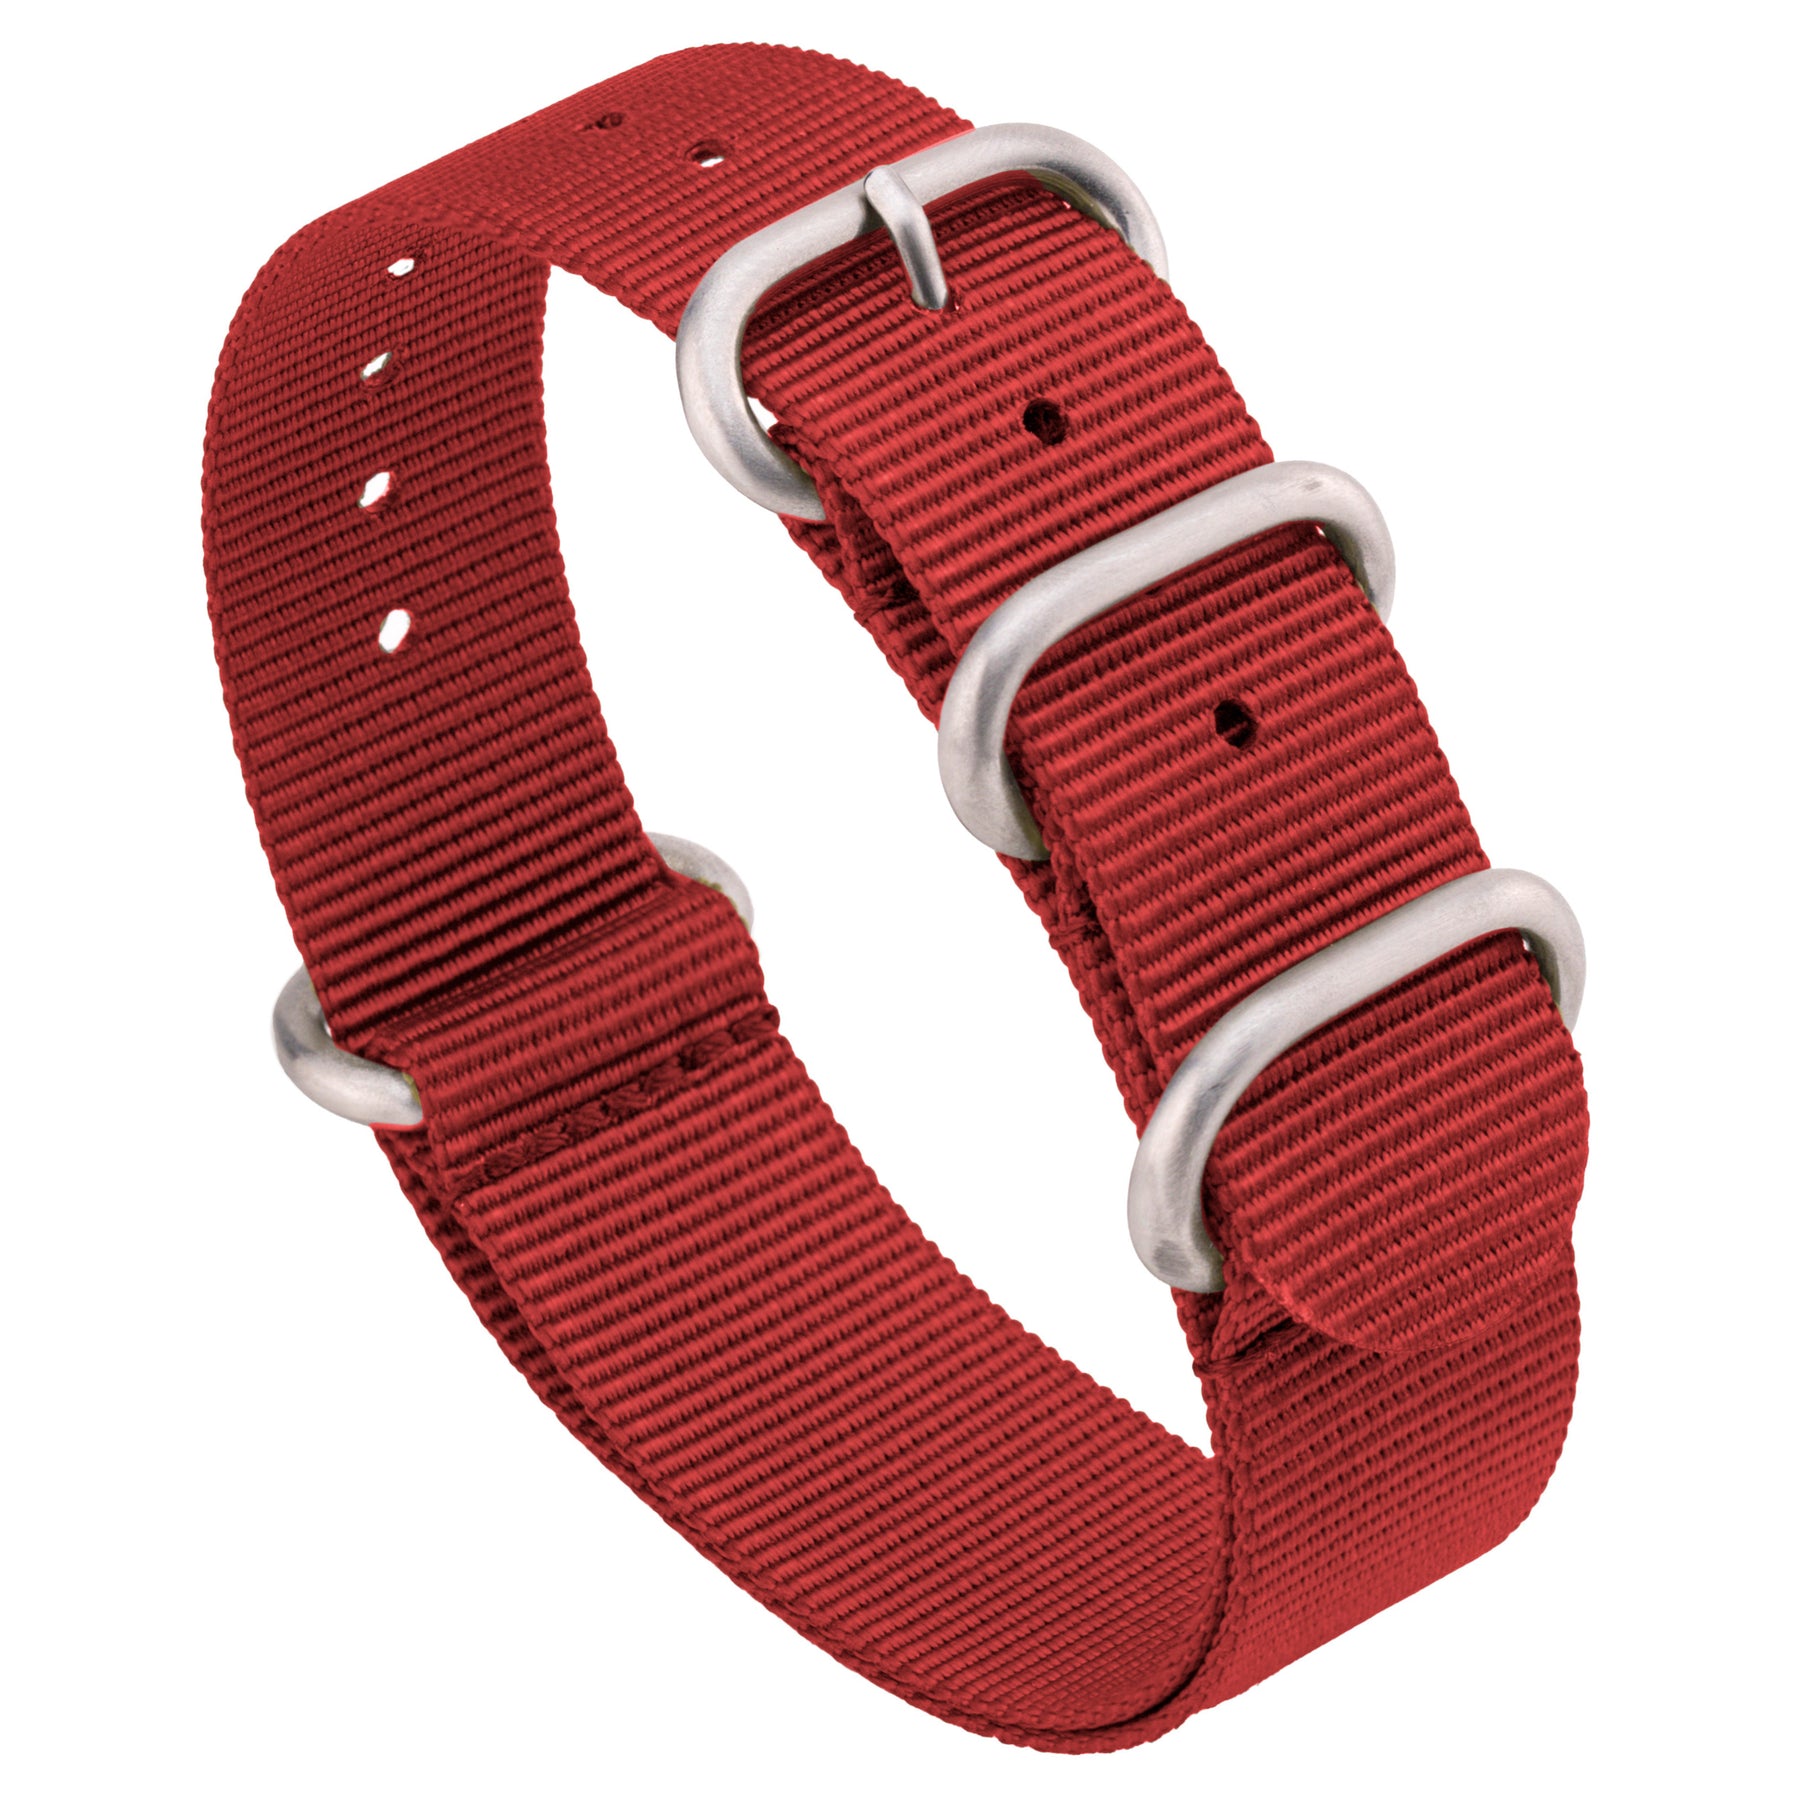 Zulu strap 5-ring Black, Red and Green 